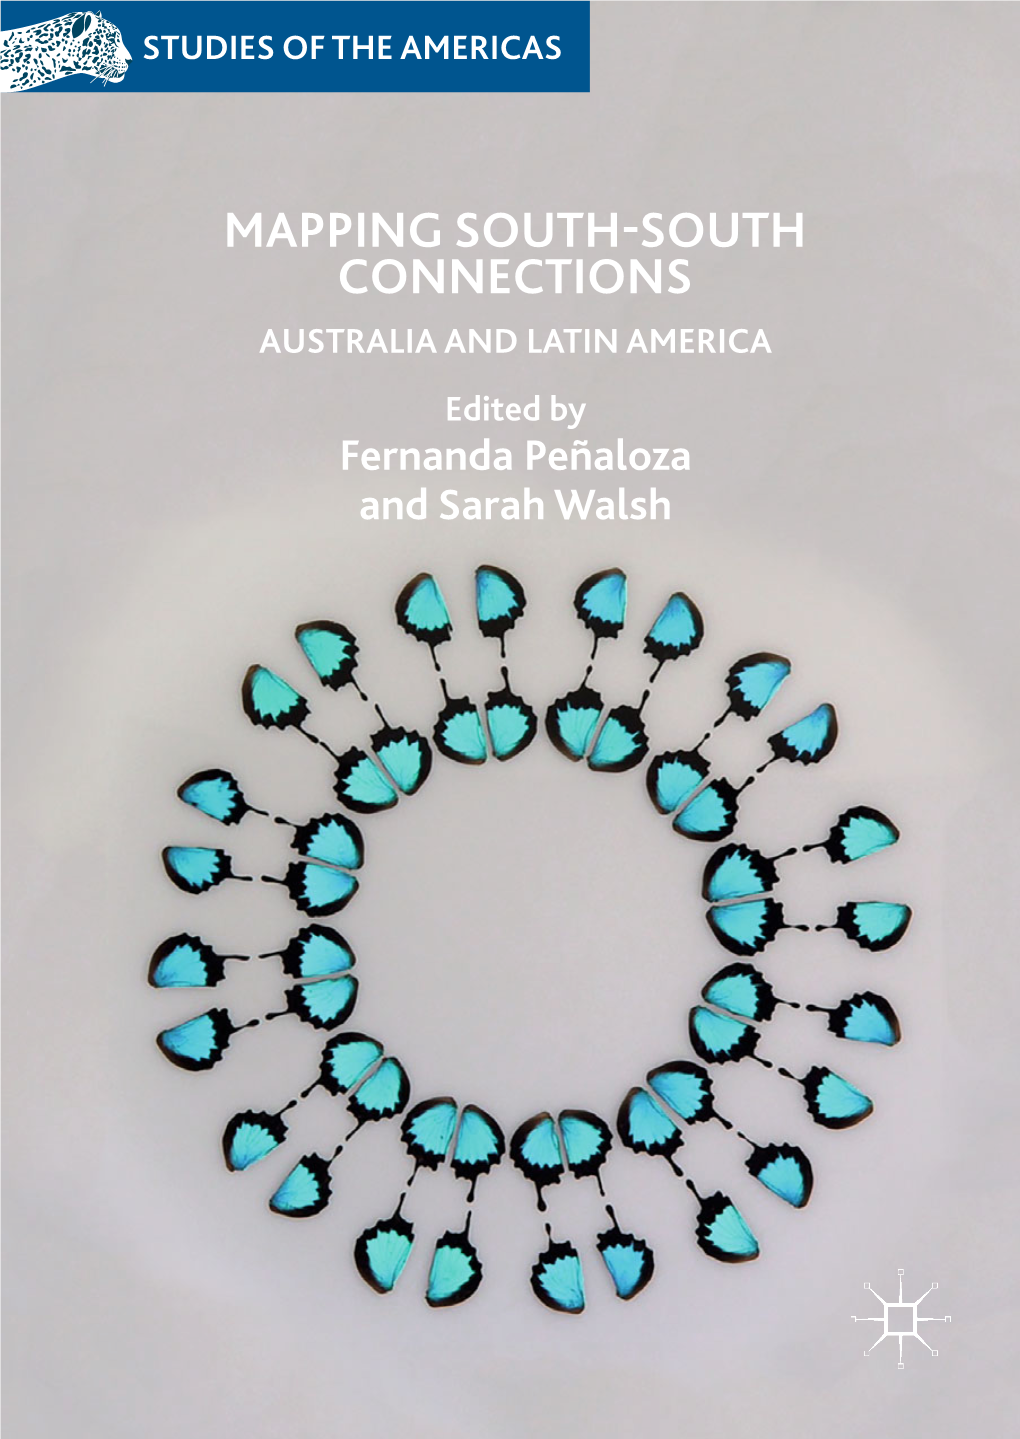 MAPPING SOUTH-SOUTH CONNECTIONS AUSTRALIA and LATIN AMERICA Edited by Fernanda Peñaloza and Sarah Walsh Studies of the Americas